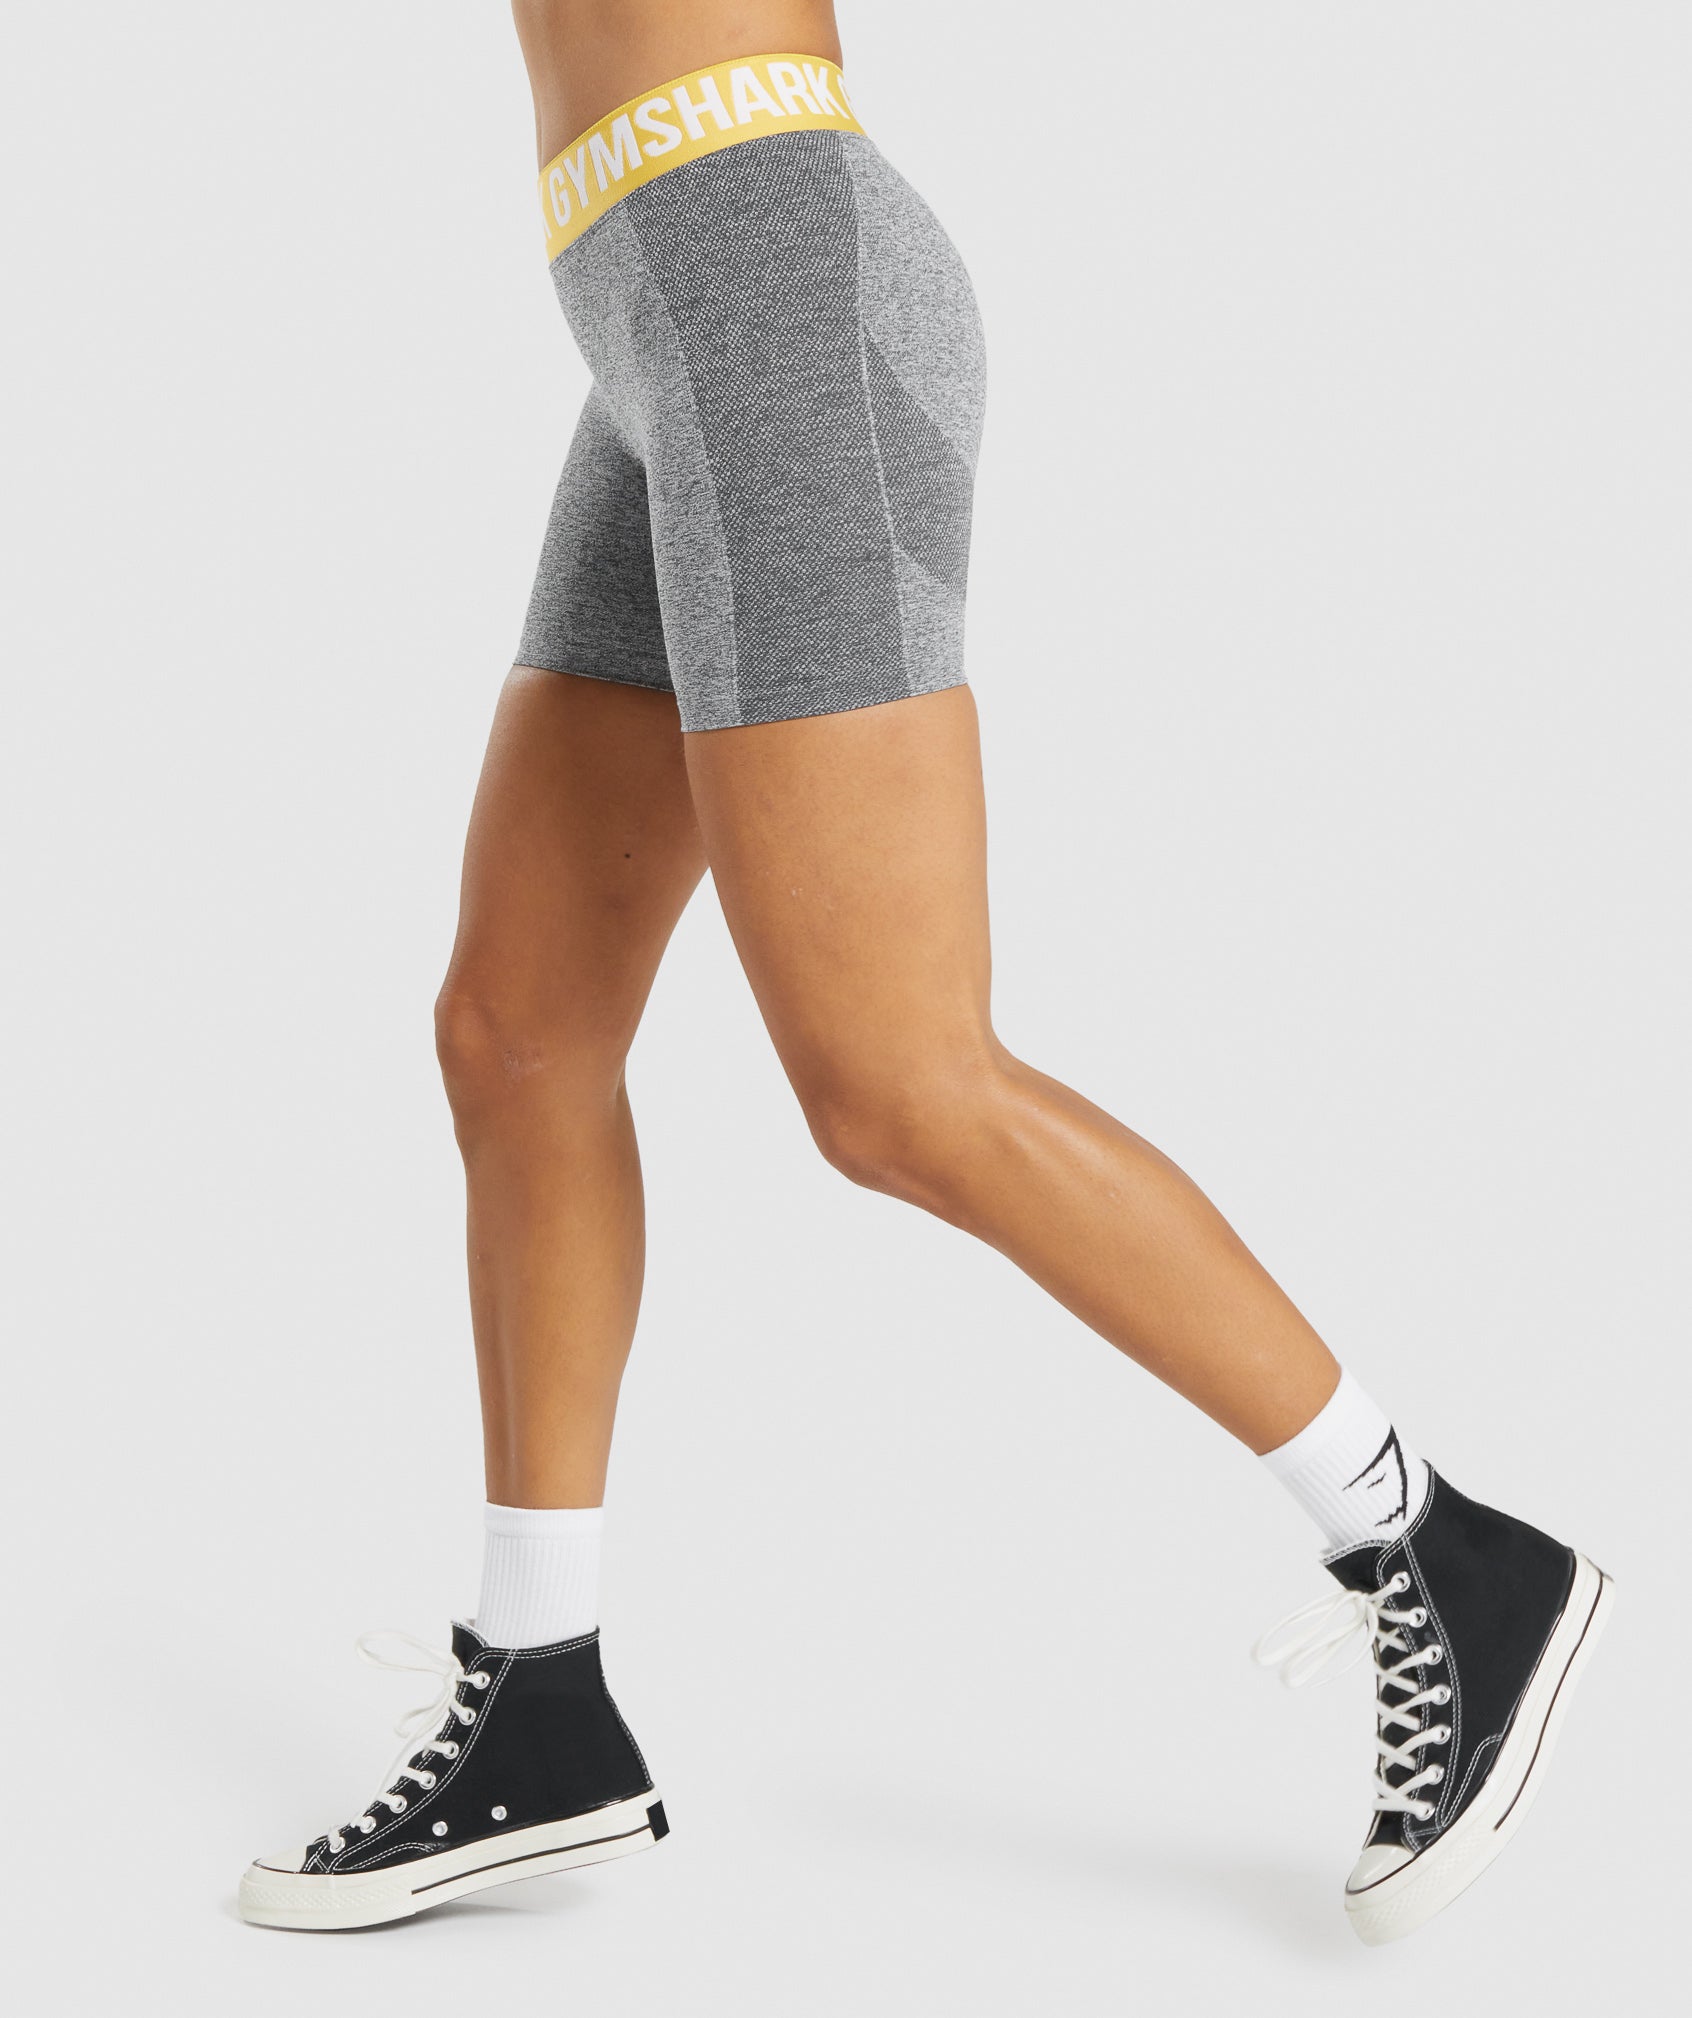 Flex Shorts in Charcoal Marl - view 4